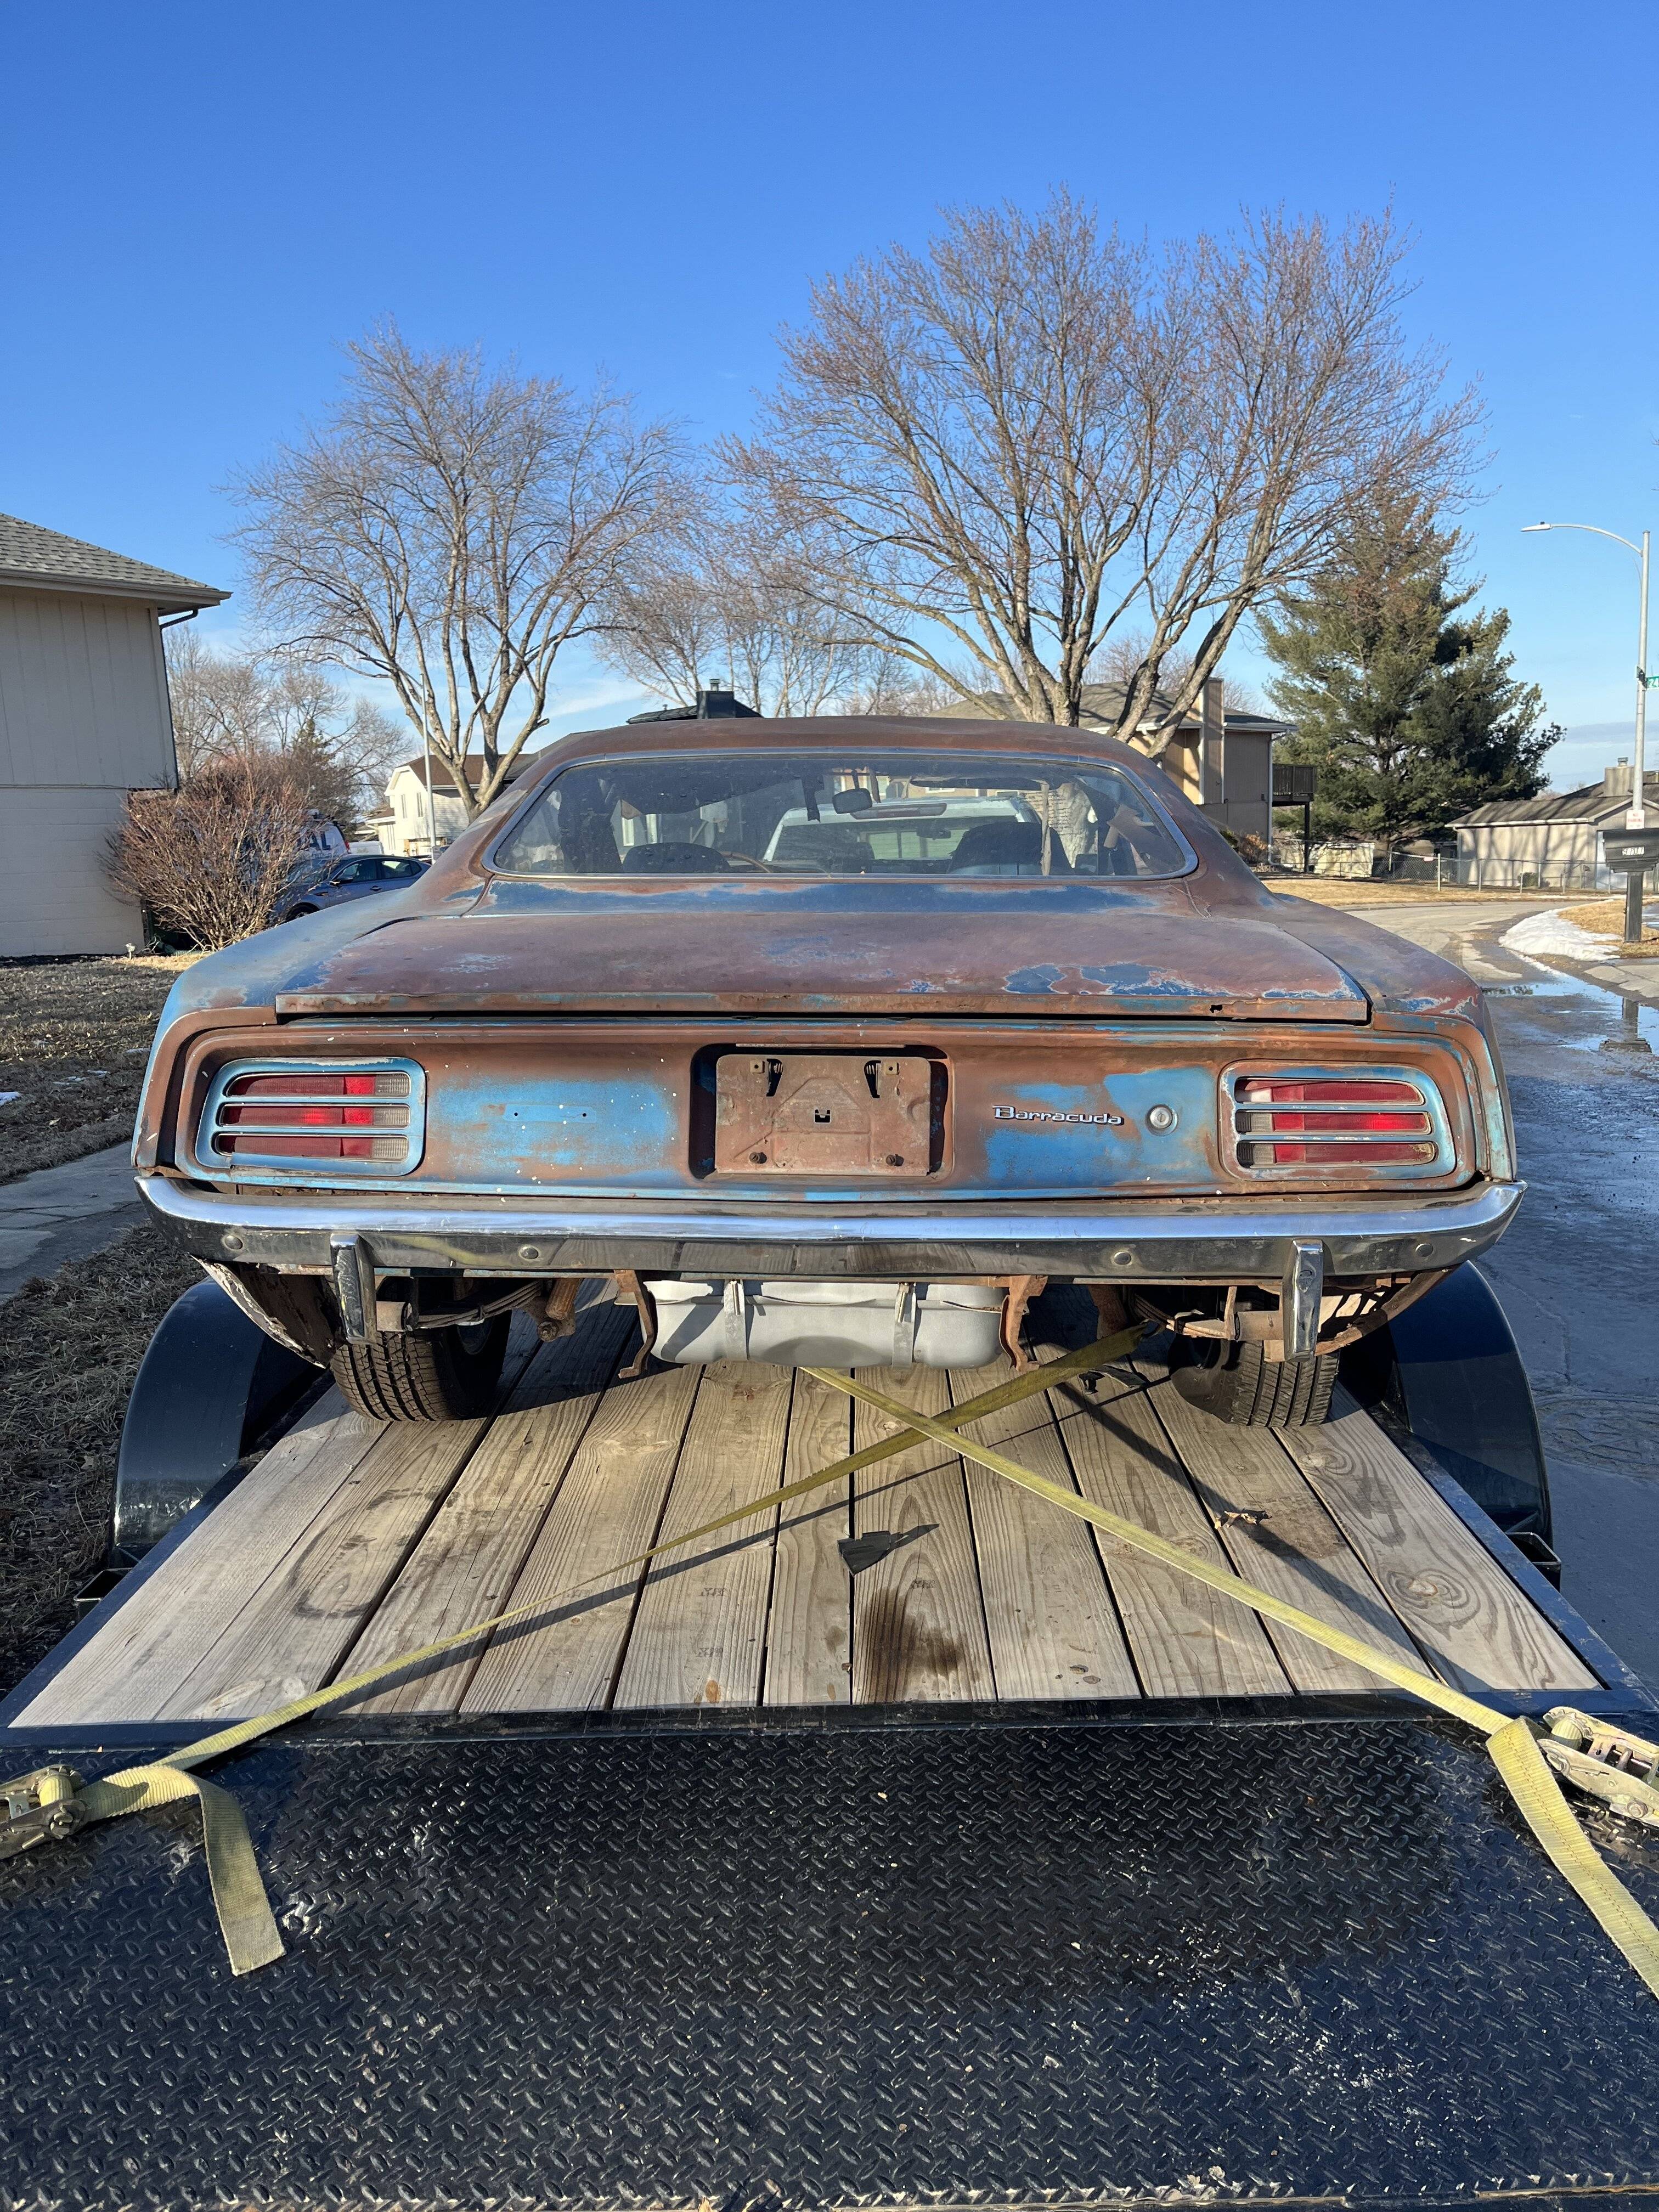 For the 1970 St. Louis Blues Barracuda owners, more info. - Moparts Forums